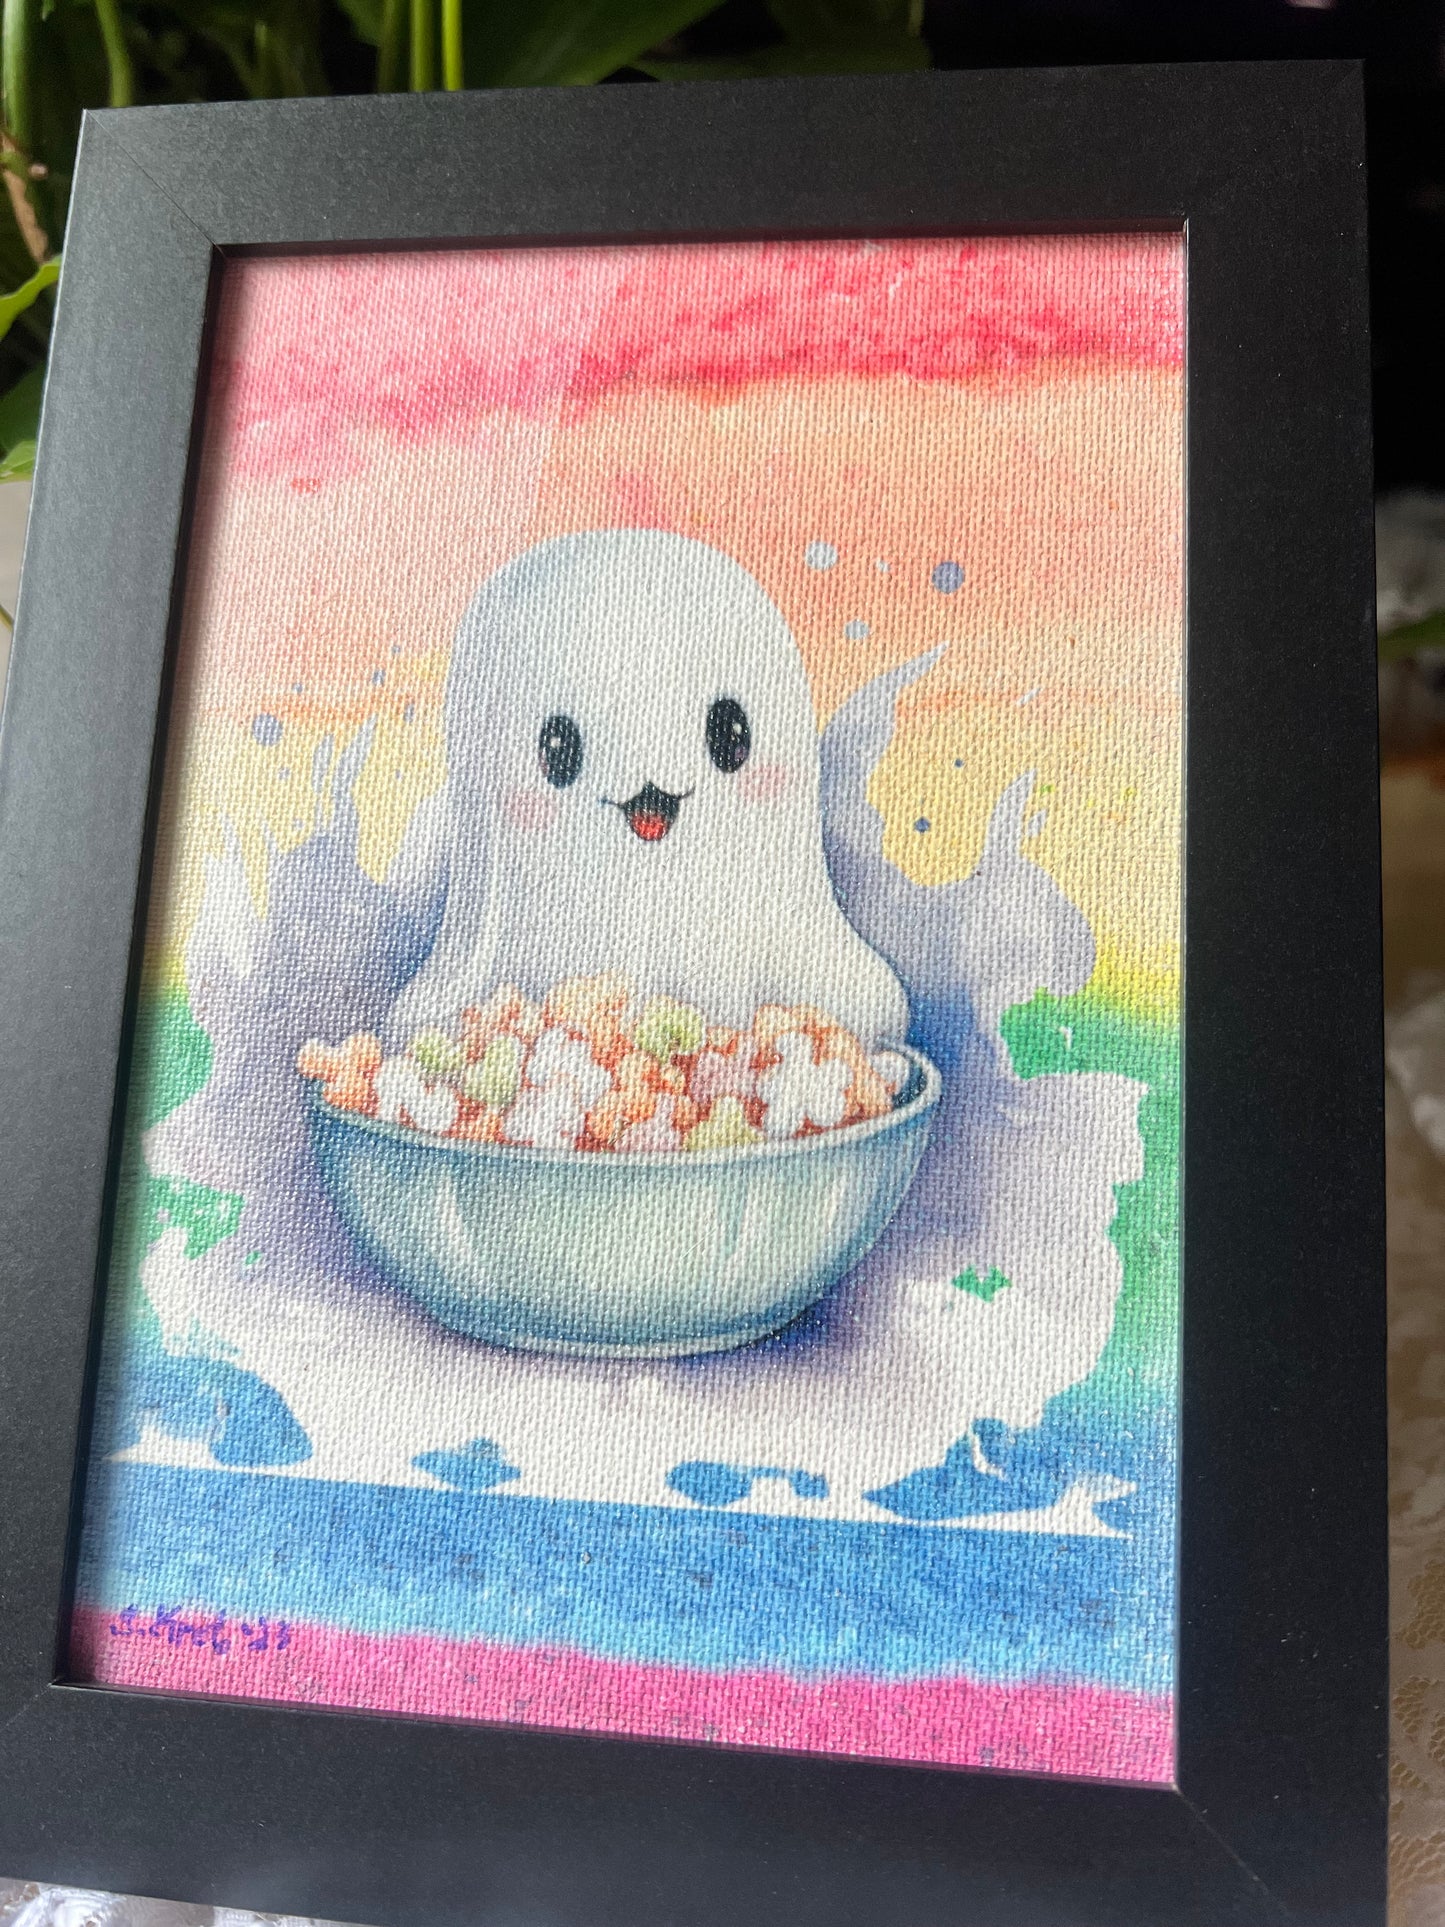 Cute Ghost Picture, Framed, Tabletop Display, Wall Hanging 5x7, Ghost Eating Snacks